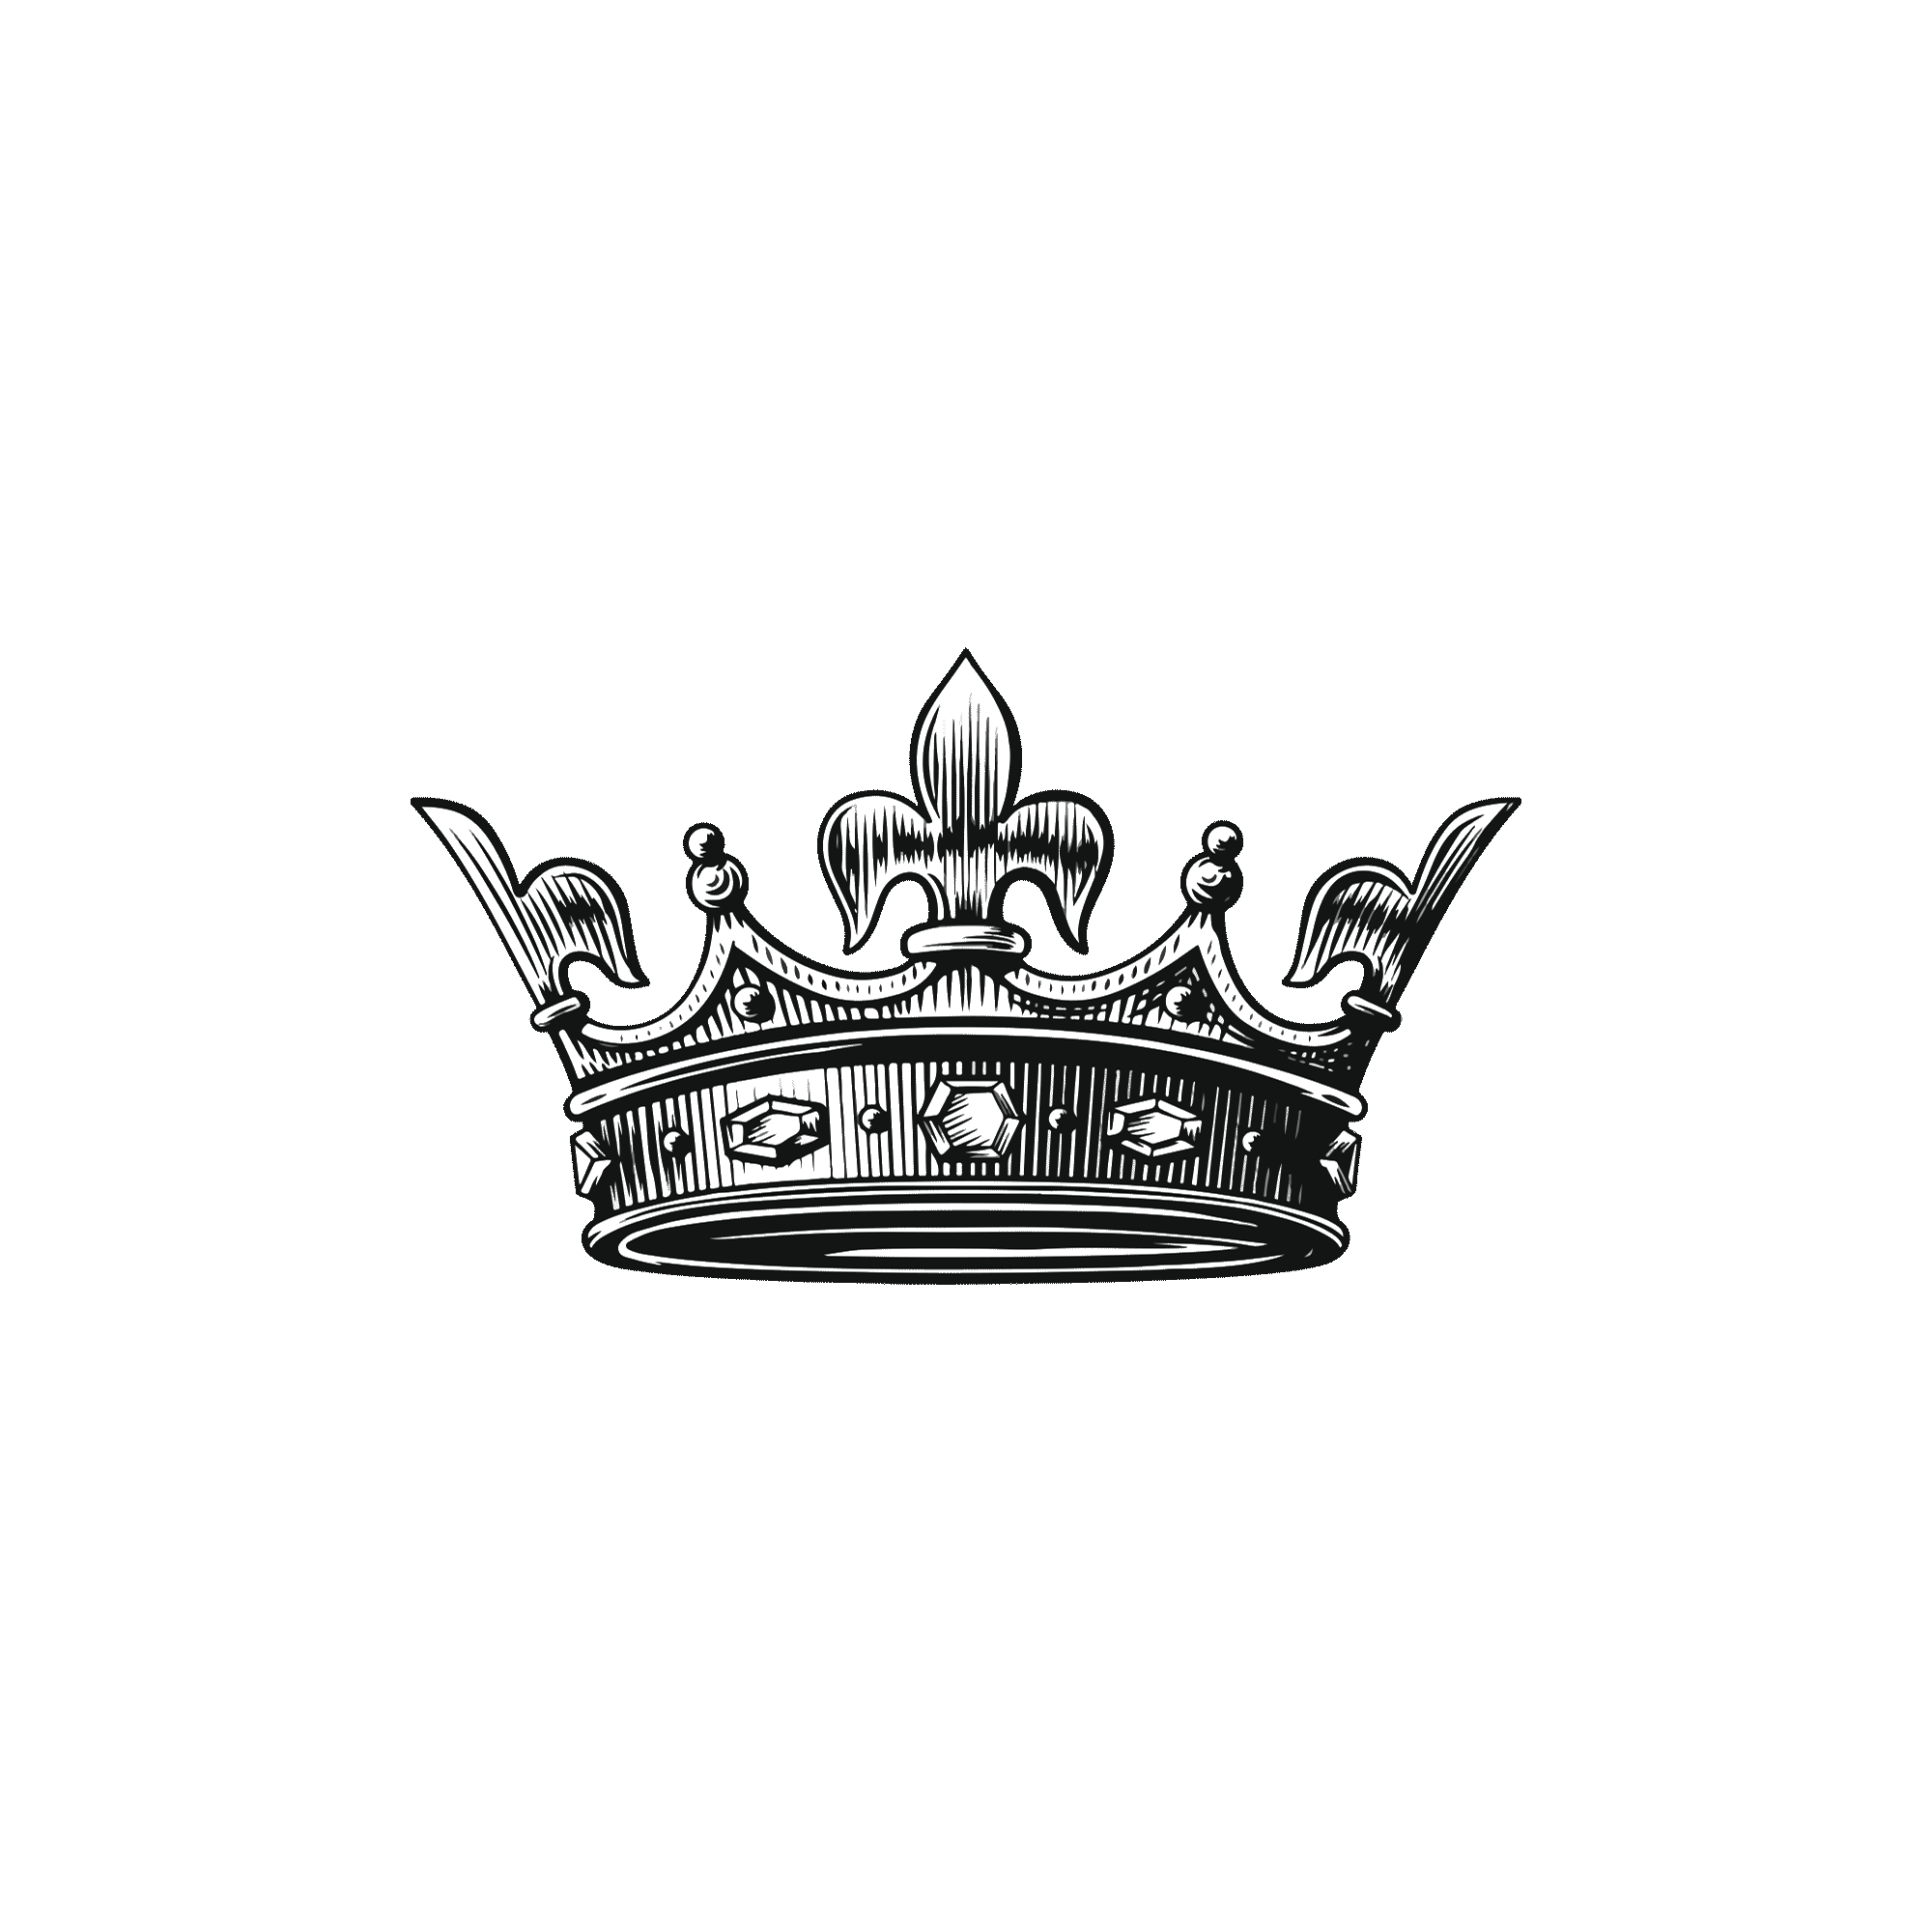 Temporary tattoos buy - "Crown" Black and white